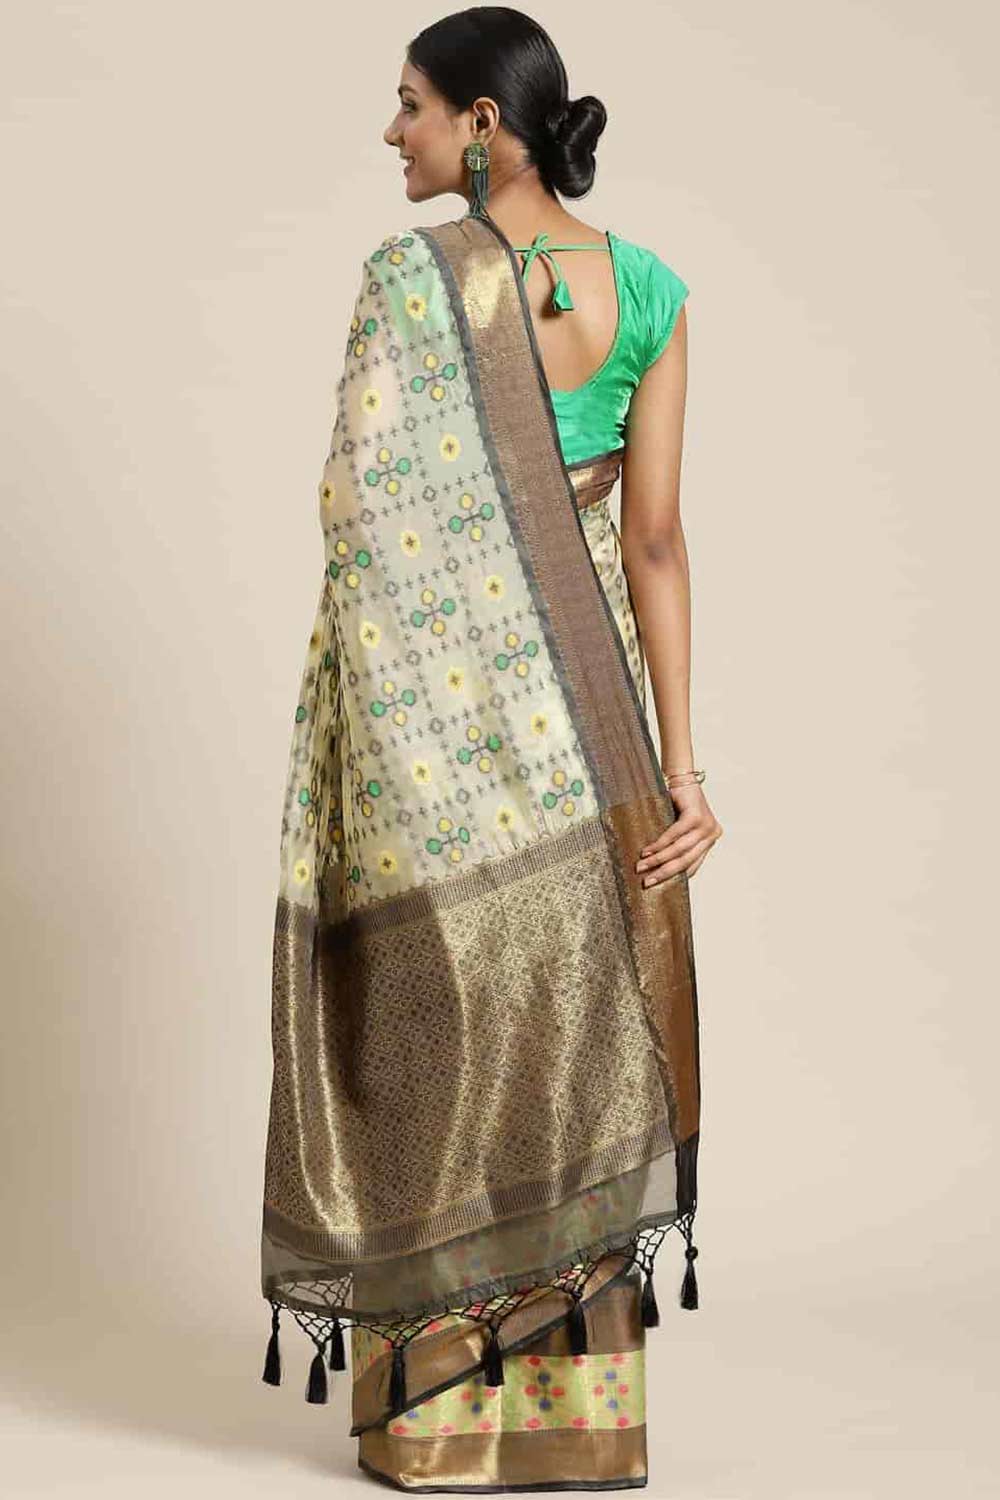 Shop Chaya Beige Art Silk Ikat One Minute Saree at best offer at our  Store - One Minute Saree